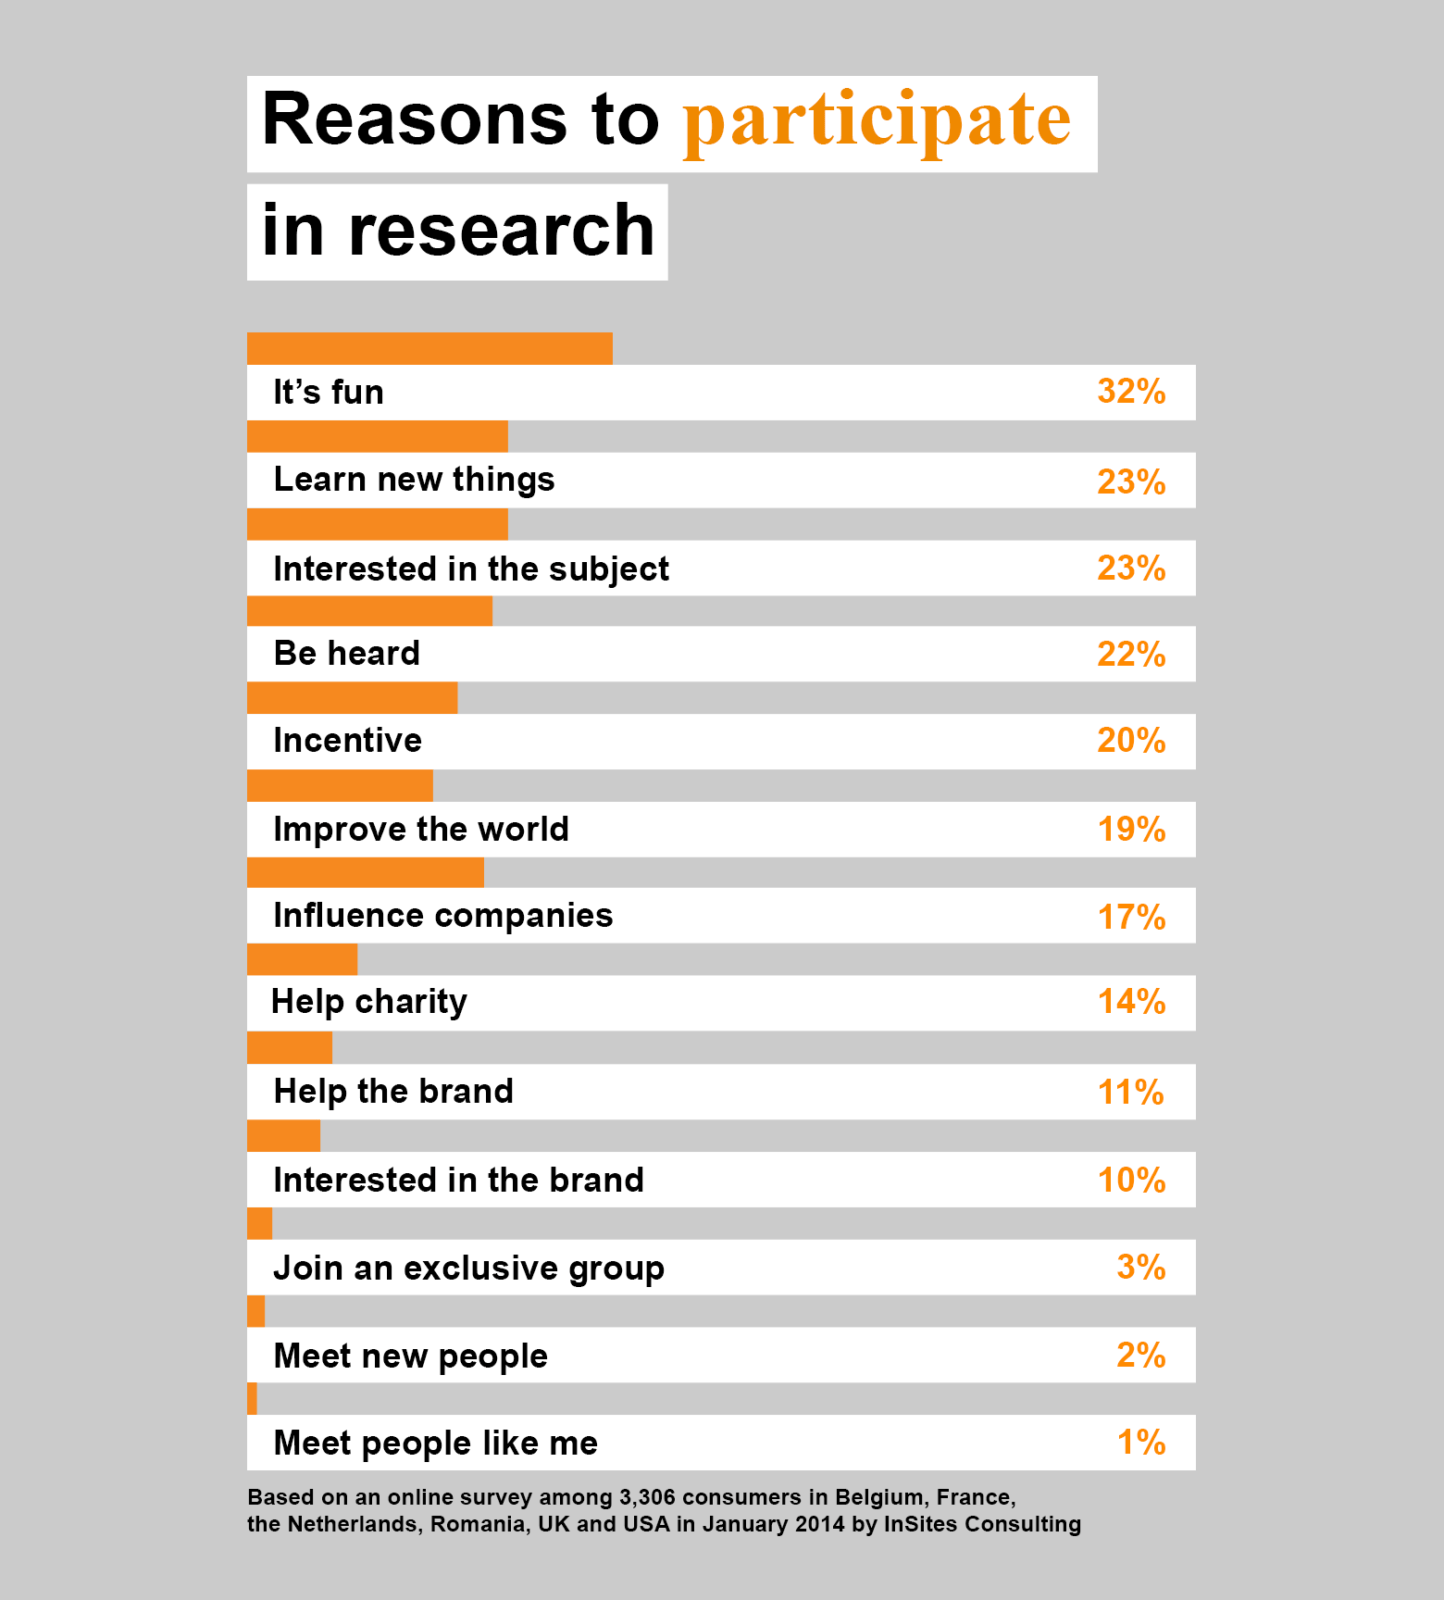 Reasons to participate in research